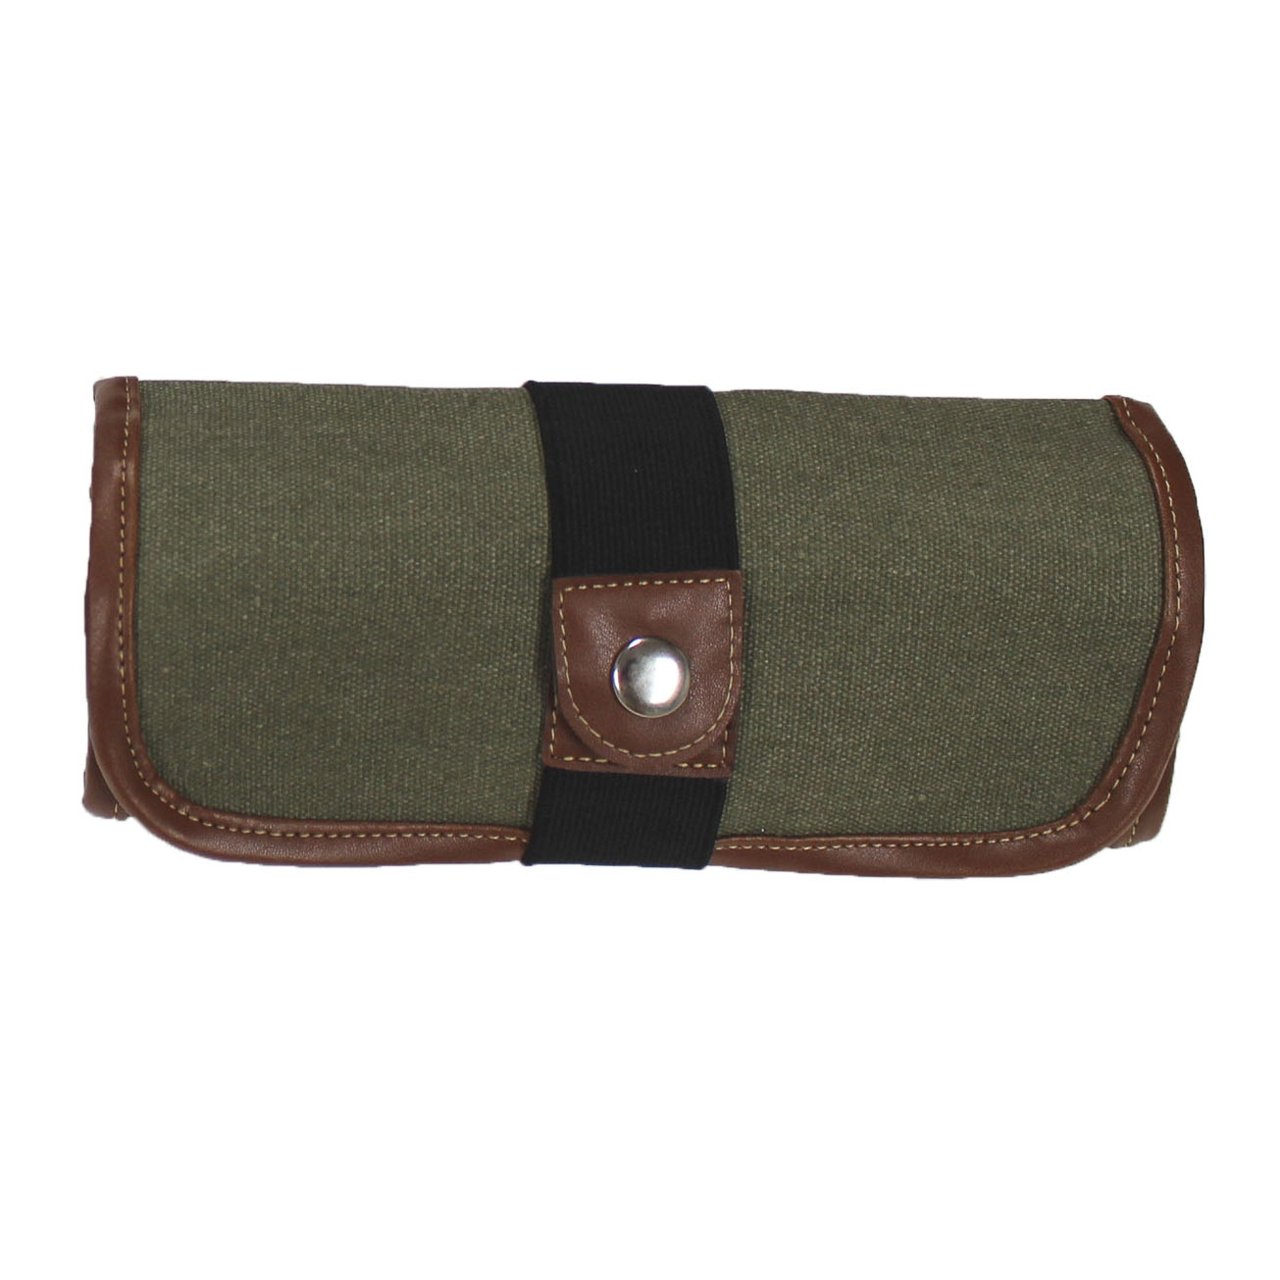 Global Arts 36 Pencil Canvas Roll Up Case - Olive - merriartist.com